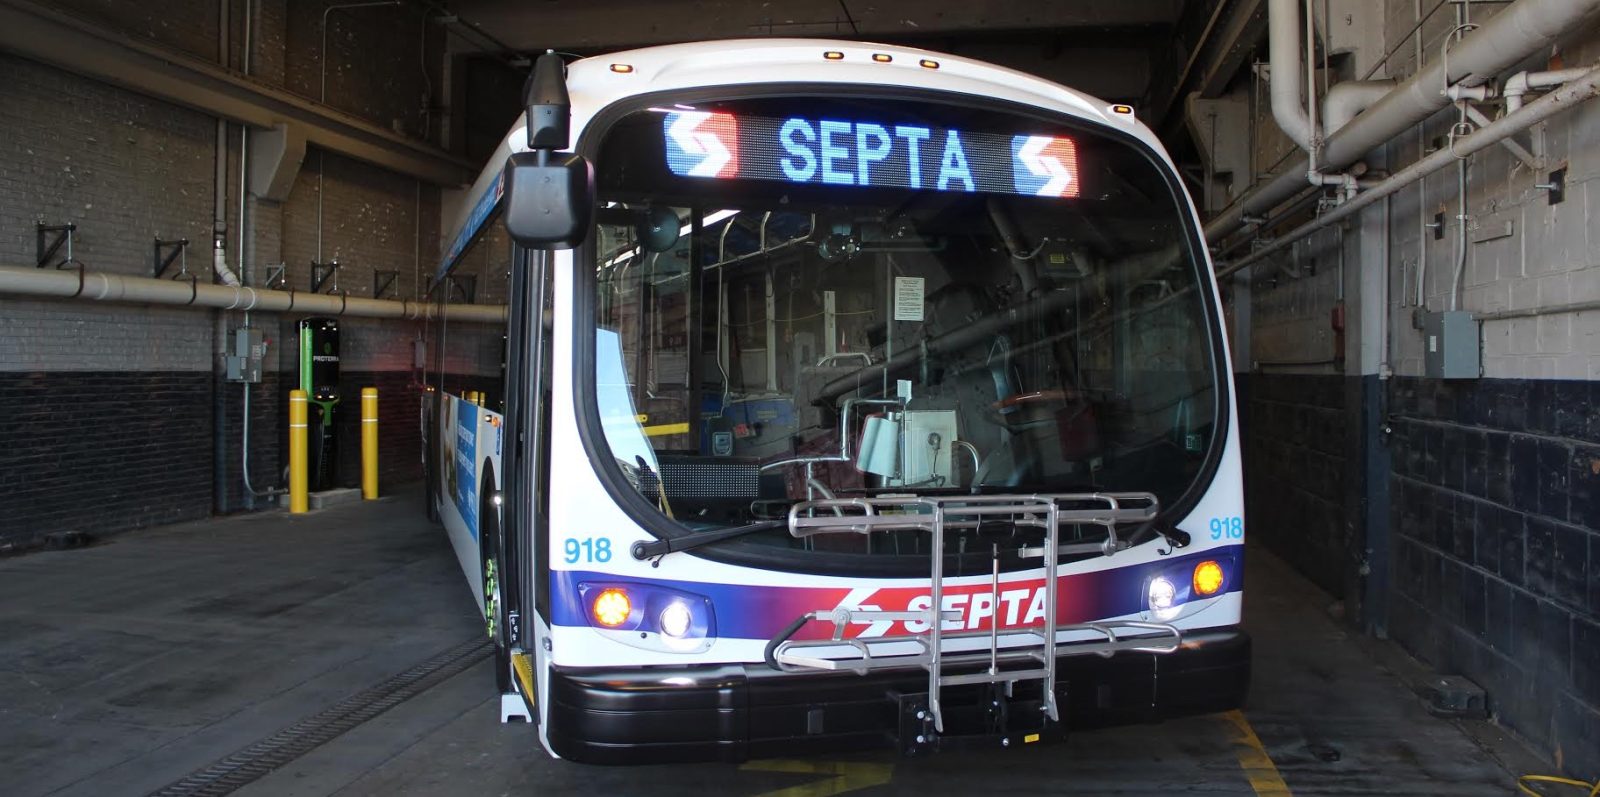 Philadelphia's SEPTA has ended 25 new electric buses to its fleet